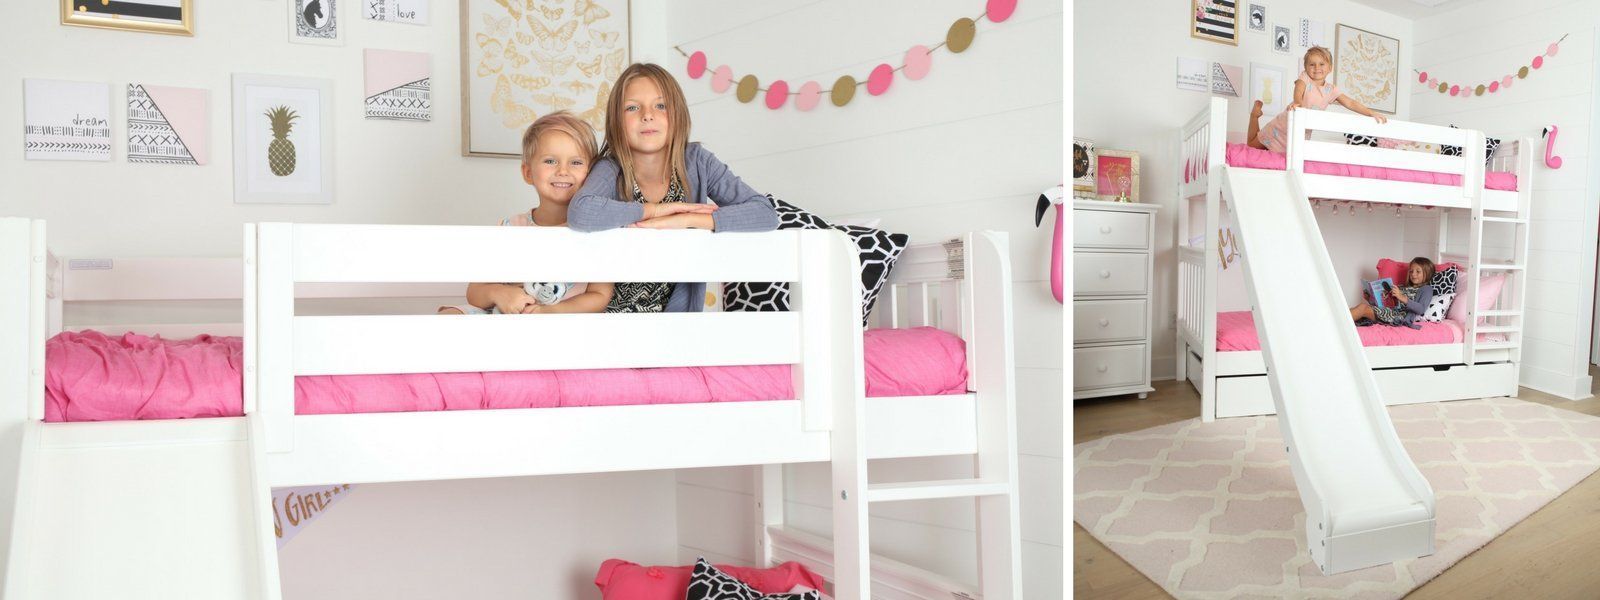 Smiles all around with the 'Jolly' Bunk Bed with Slide